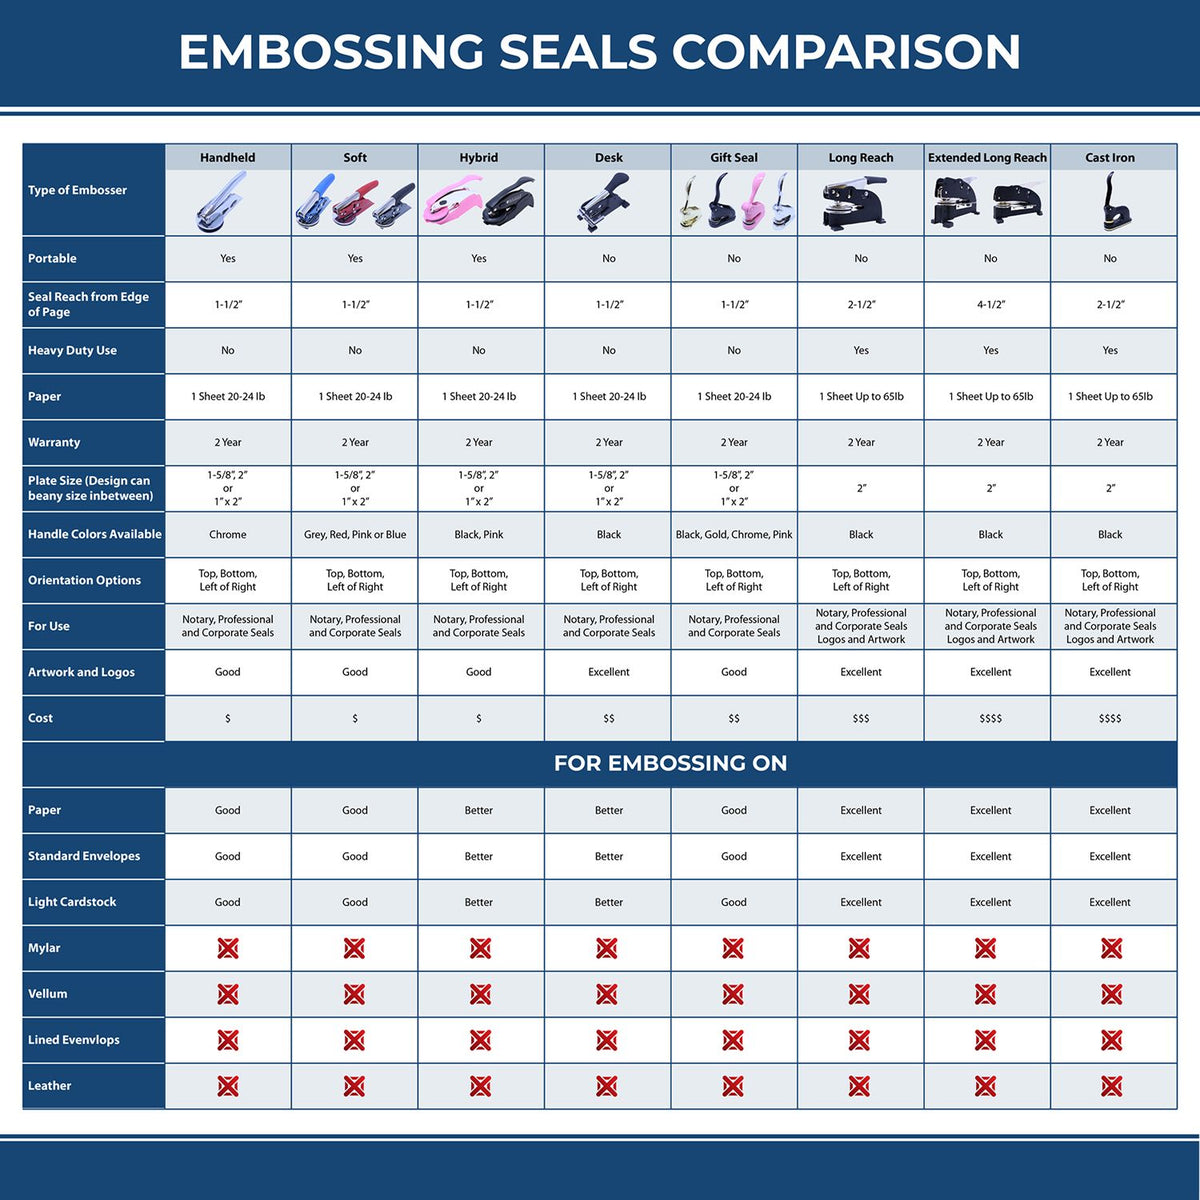 A comparison chart for the different types of mount models available for the Soft Wisconsin Professional Geologist Seal